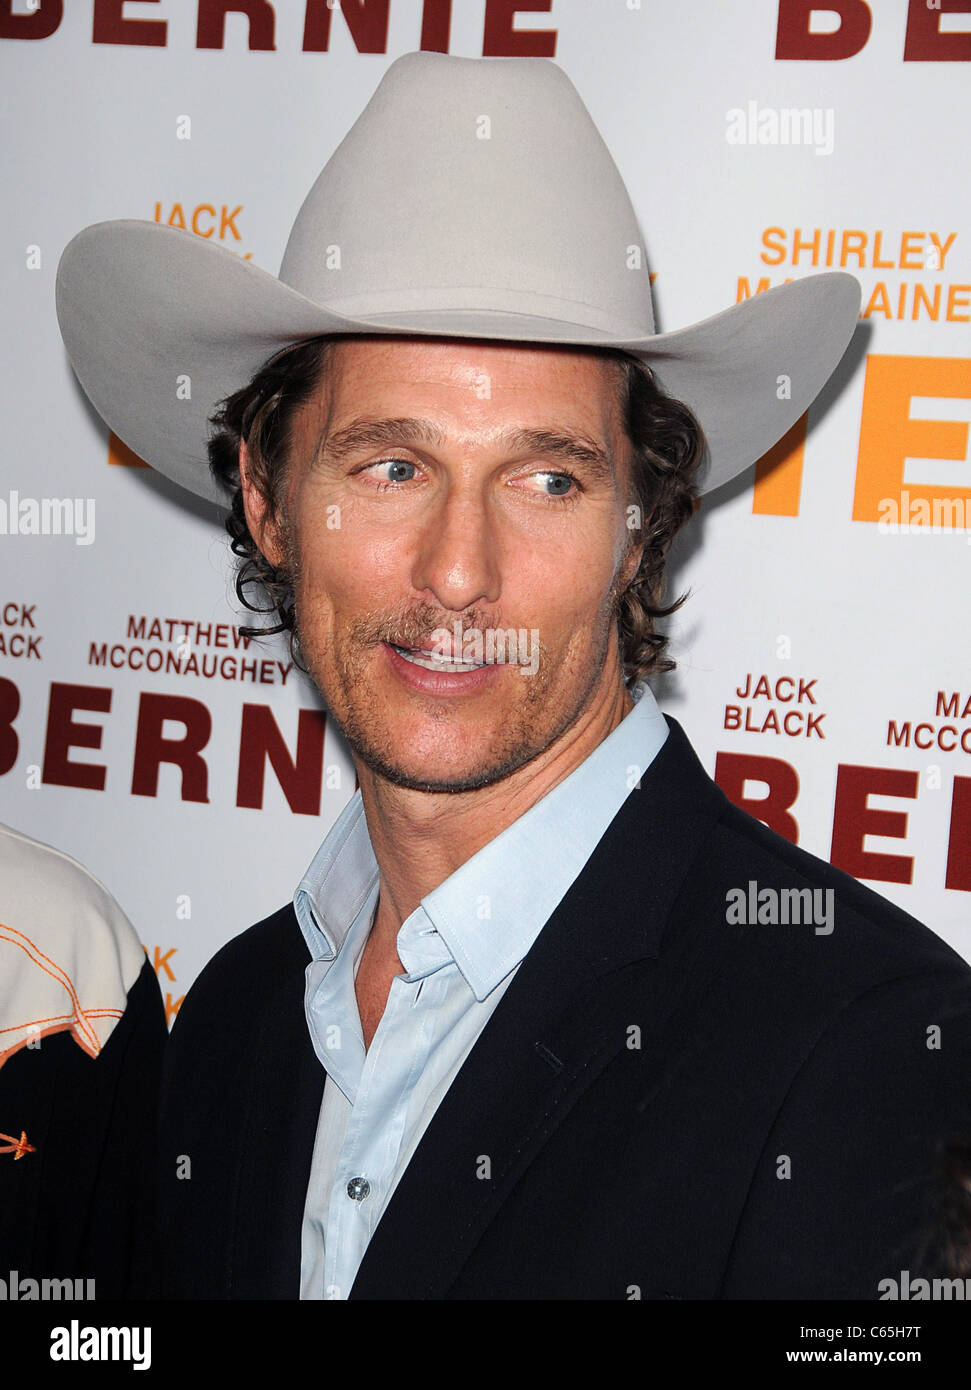 Matthew McConaughey at arrivals for BERNIE Premiere, Regal Theatres at L.A. Live, Los Angeles, CA June 16, 2011. Photo By: Dee Cercone/Everett Collection Stock Photo